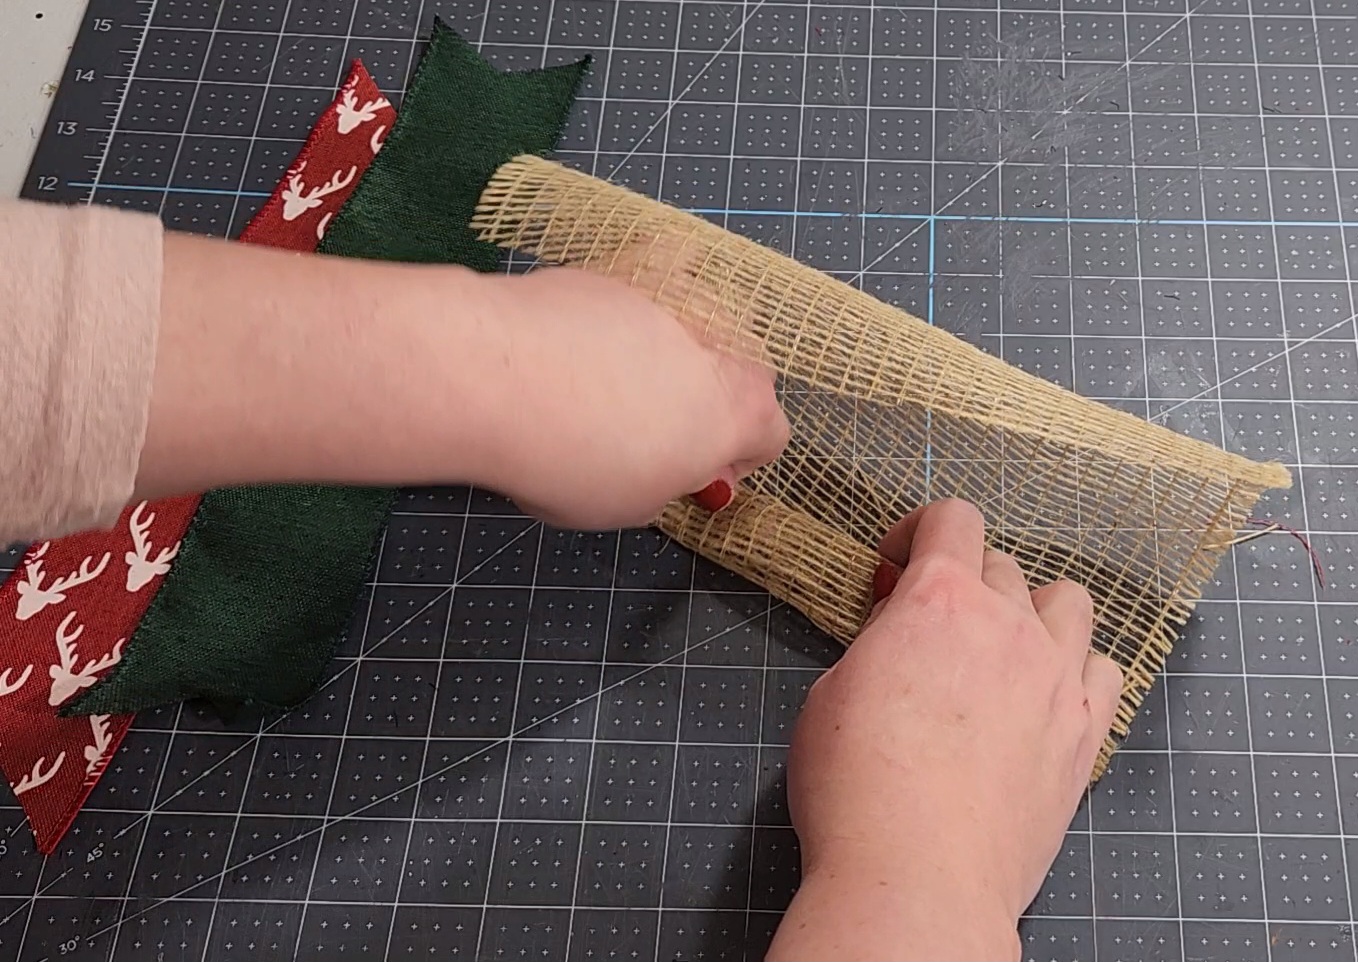 Rolling a piece of deco mesh into a tight spiral.